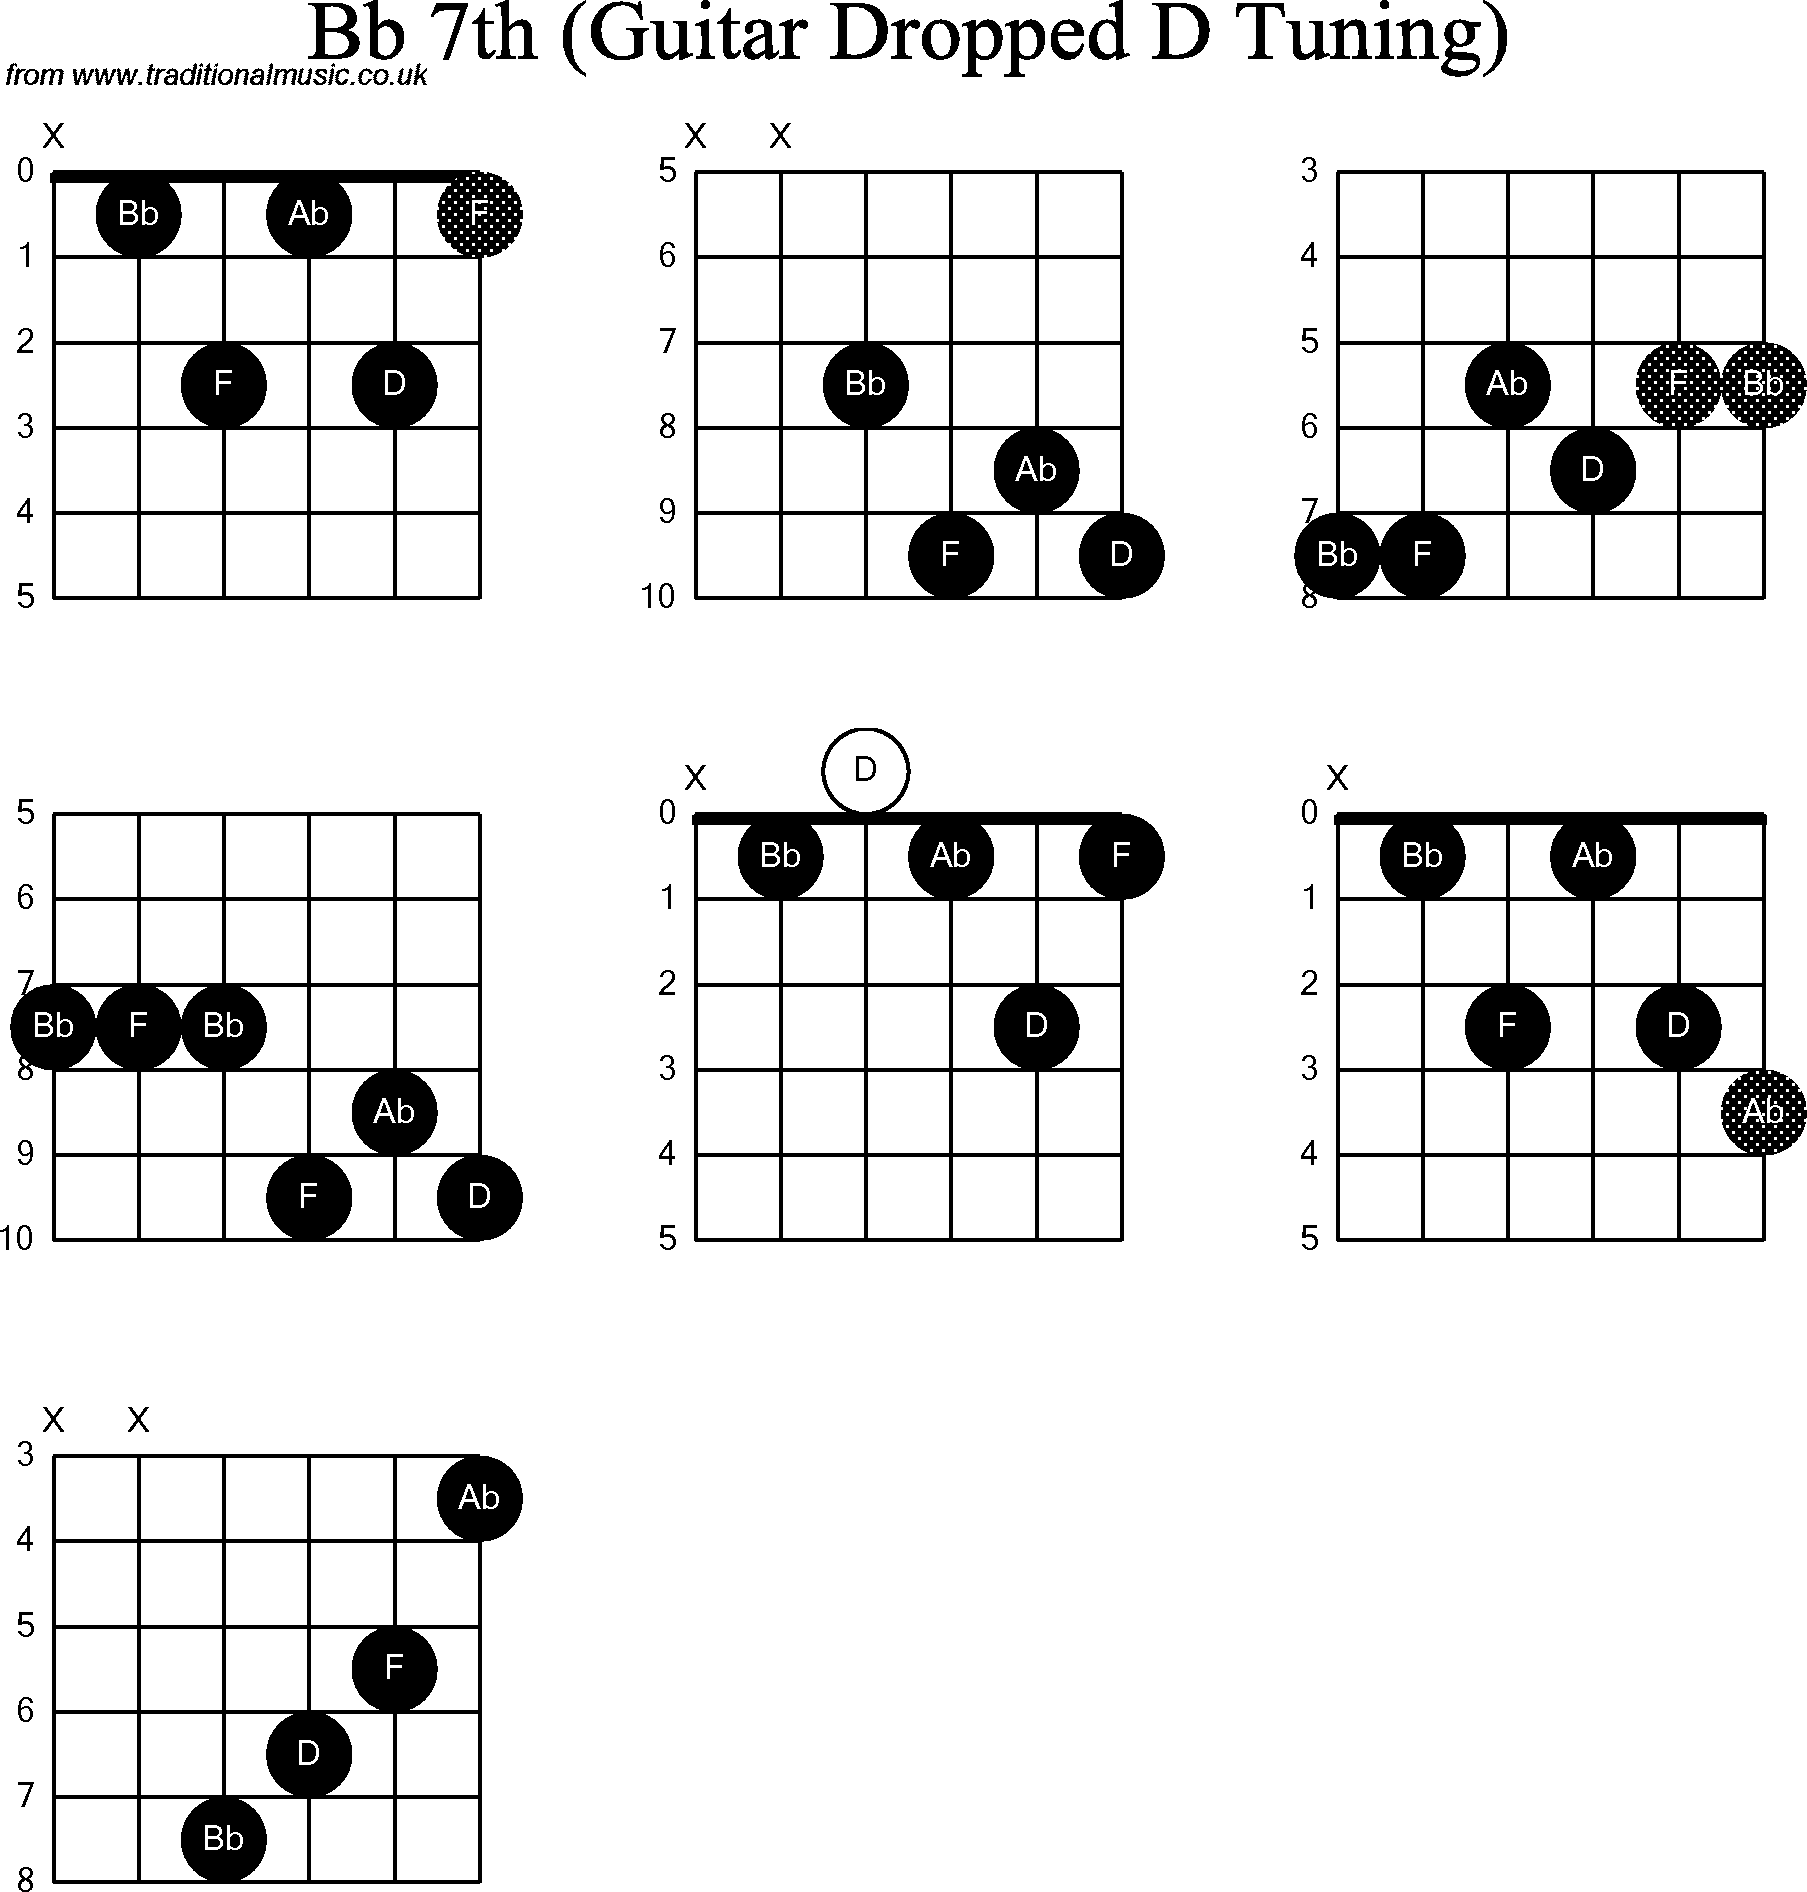 Chord diagrams for dropped D Guitar(DADGBE), Bb7th